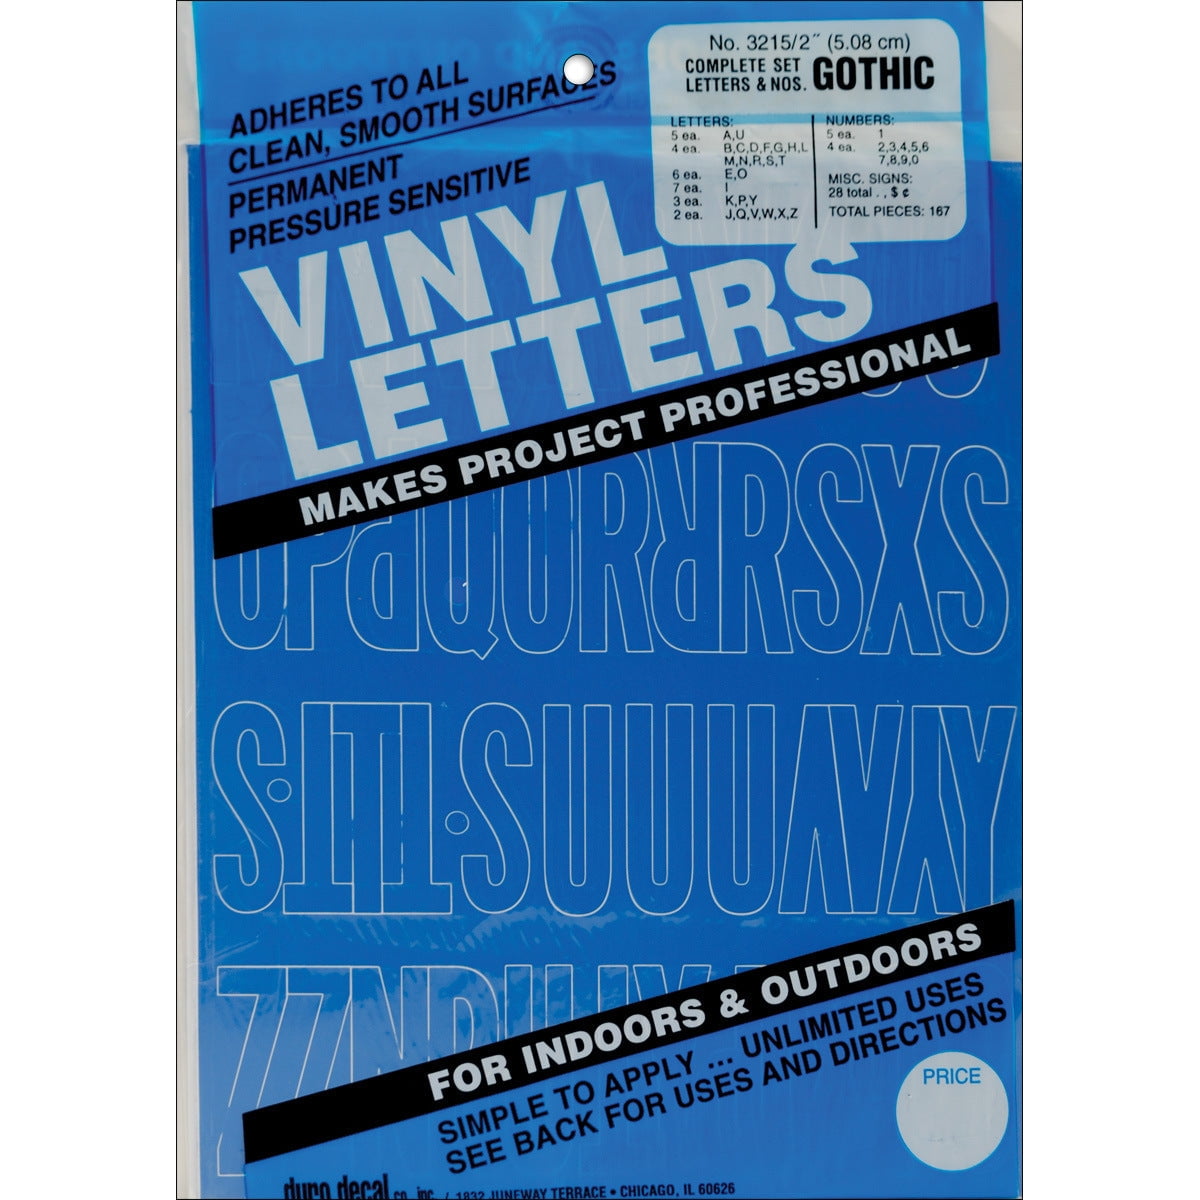 Headline Sign 31214 Stick-On Vinyl Letters and Numbers, Blue, 2-Inch